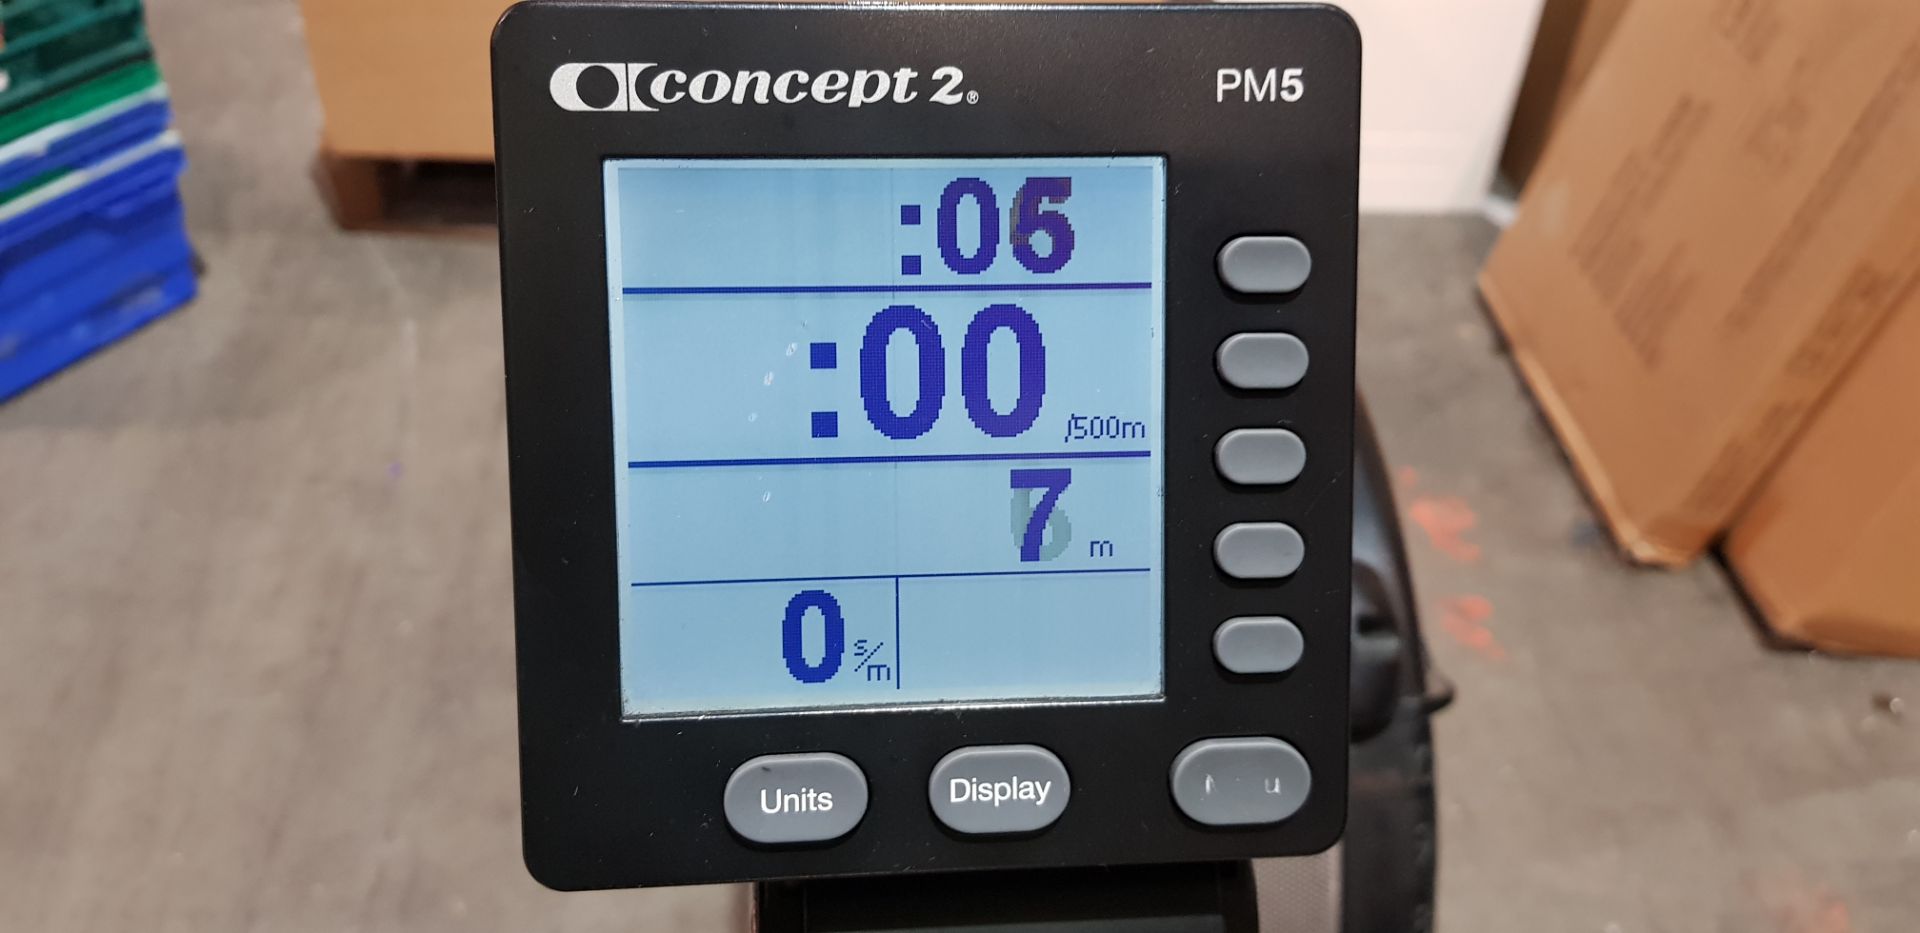 1 X CONCEPT 2 INDOOR ROWER - PM5 PERFORMANCE MONITOR - ADJUSTABLE FLEXFOOT FOOT RESTS - ALLUMINIUM - Image 2 of 2